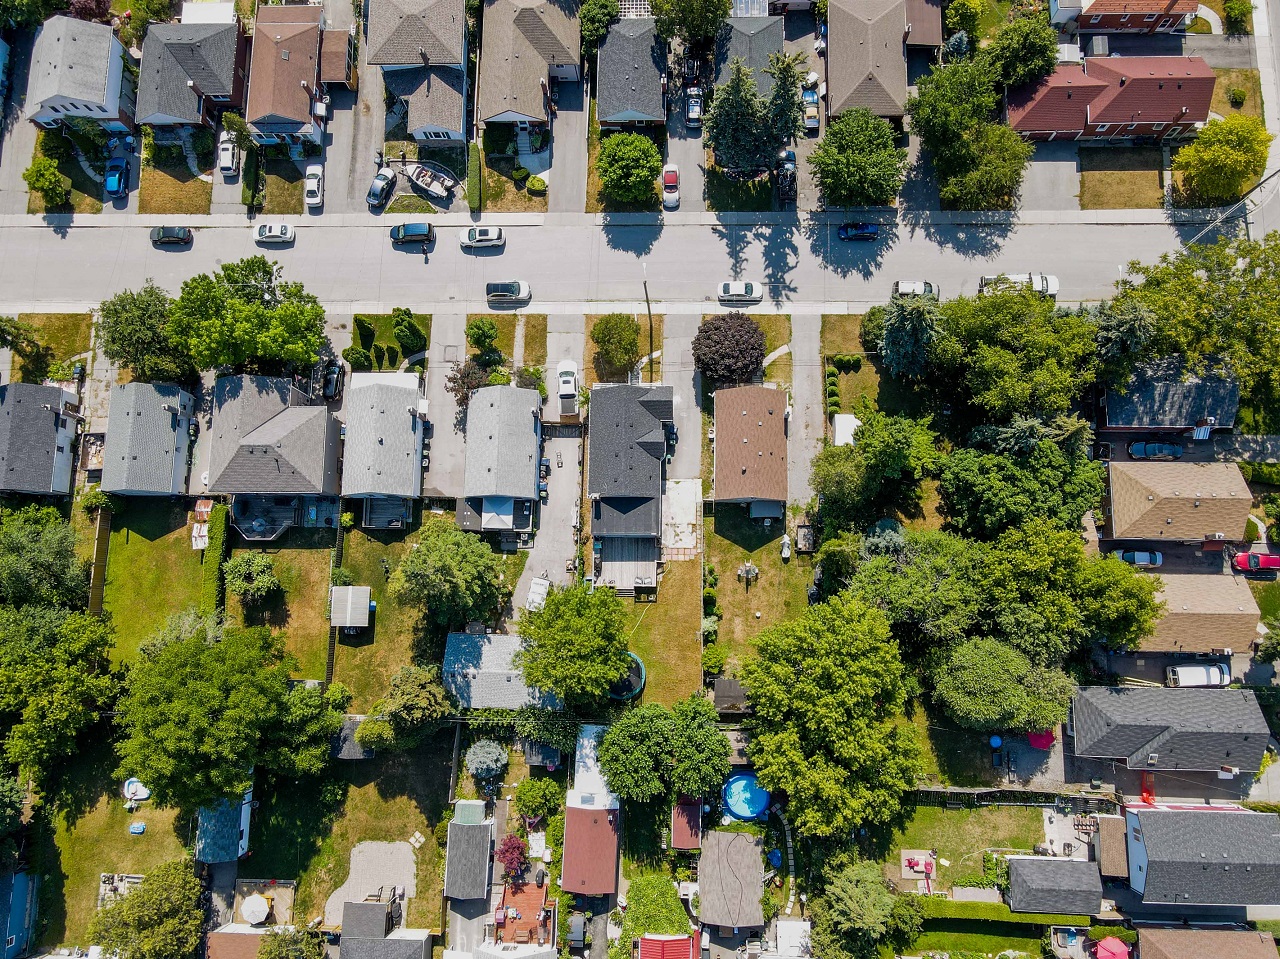 Ariel drone view of rooftops of suburban houses.